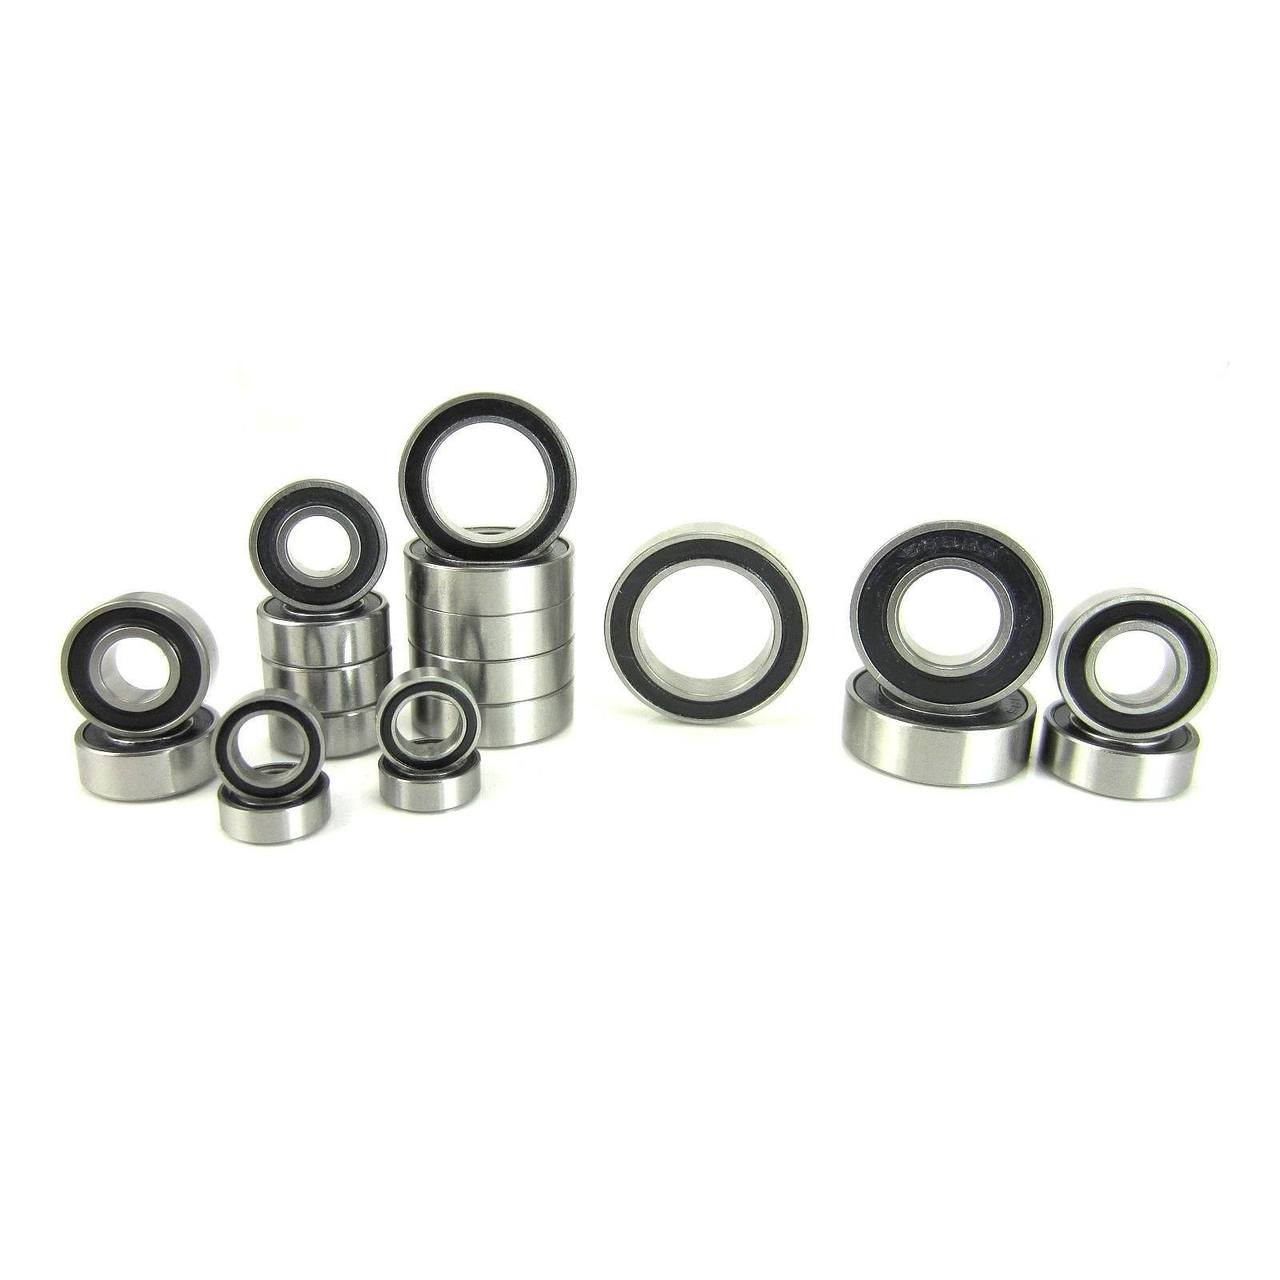 TRB RC Ball Bearing Kit (20) Rubber Sealed for Traxxas Slash 4x4 Ultimate